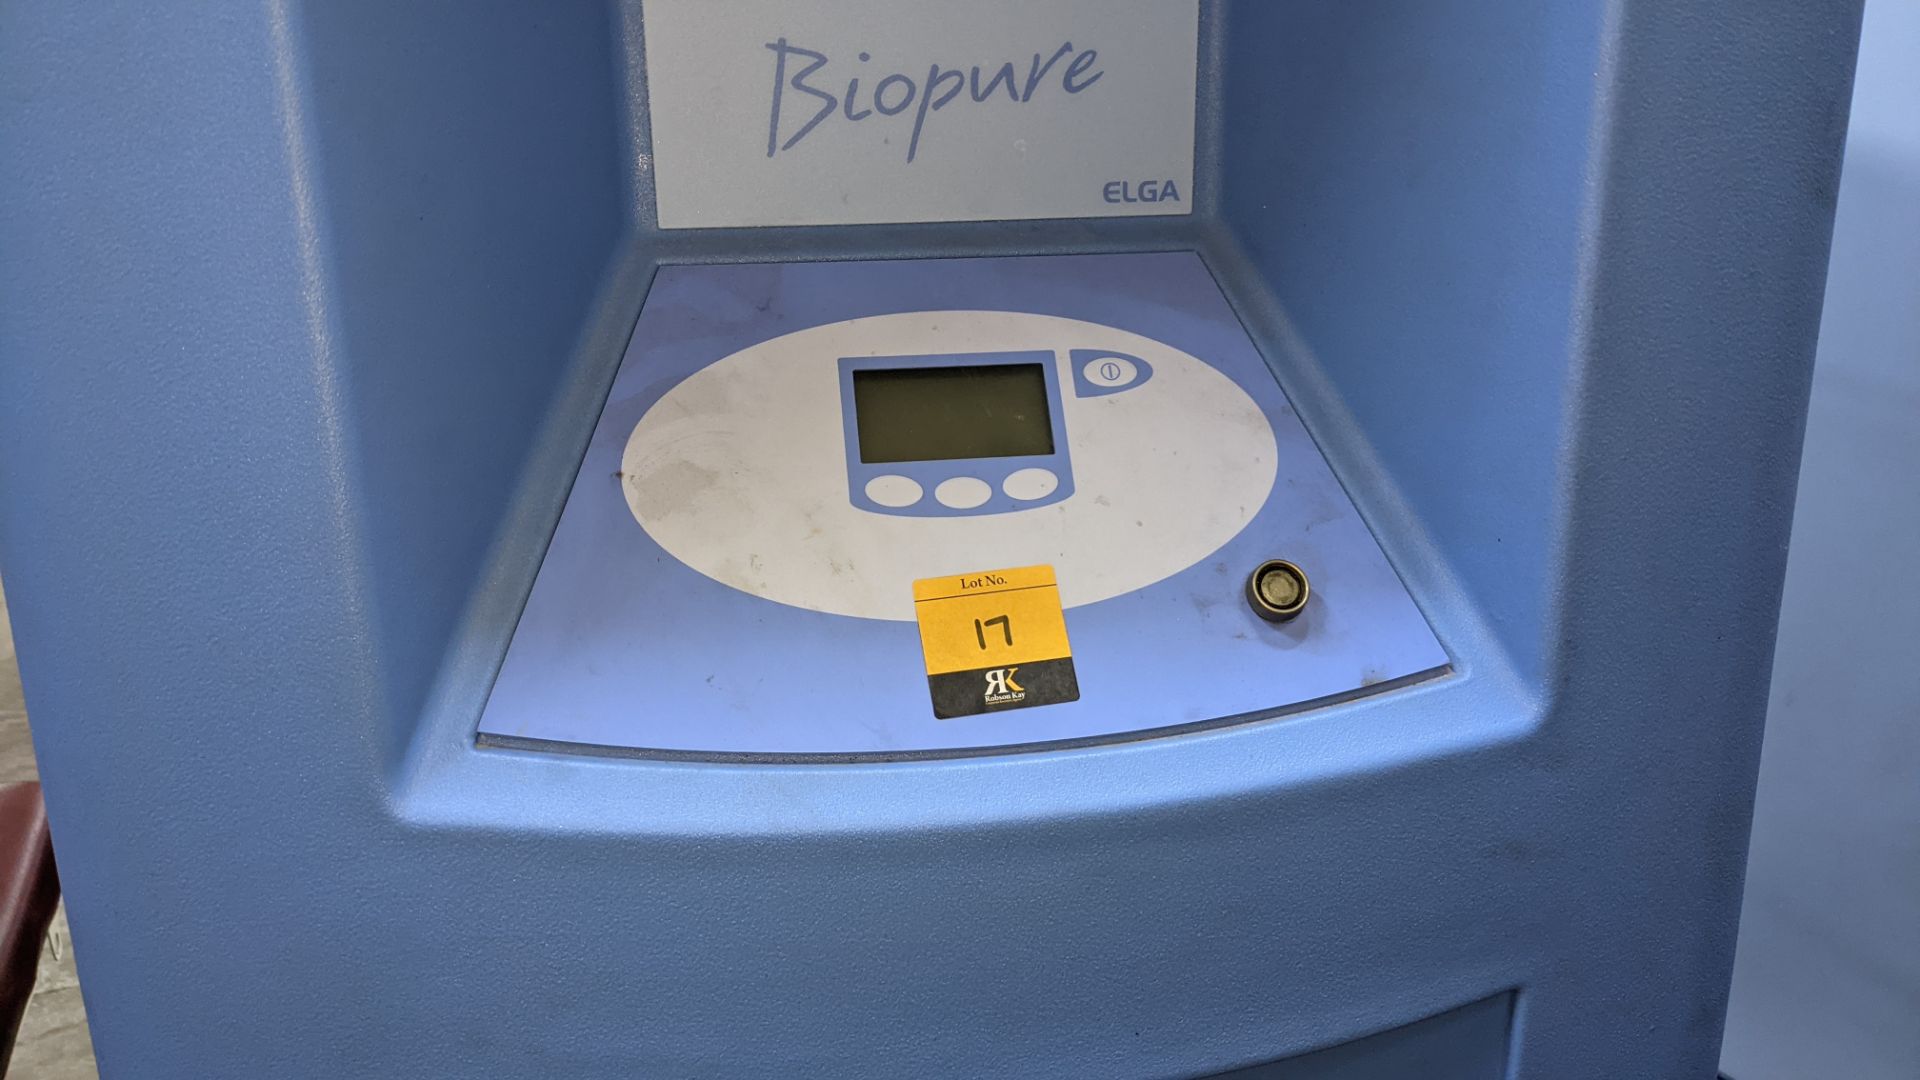 Elga Biopure 600 high output water purification system with large storage reservoir, designed to fee - Image 4 of 9